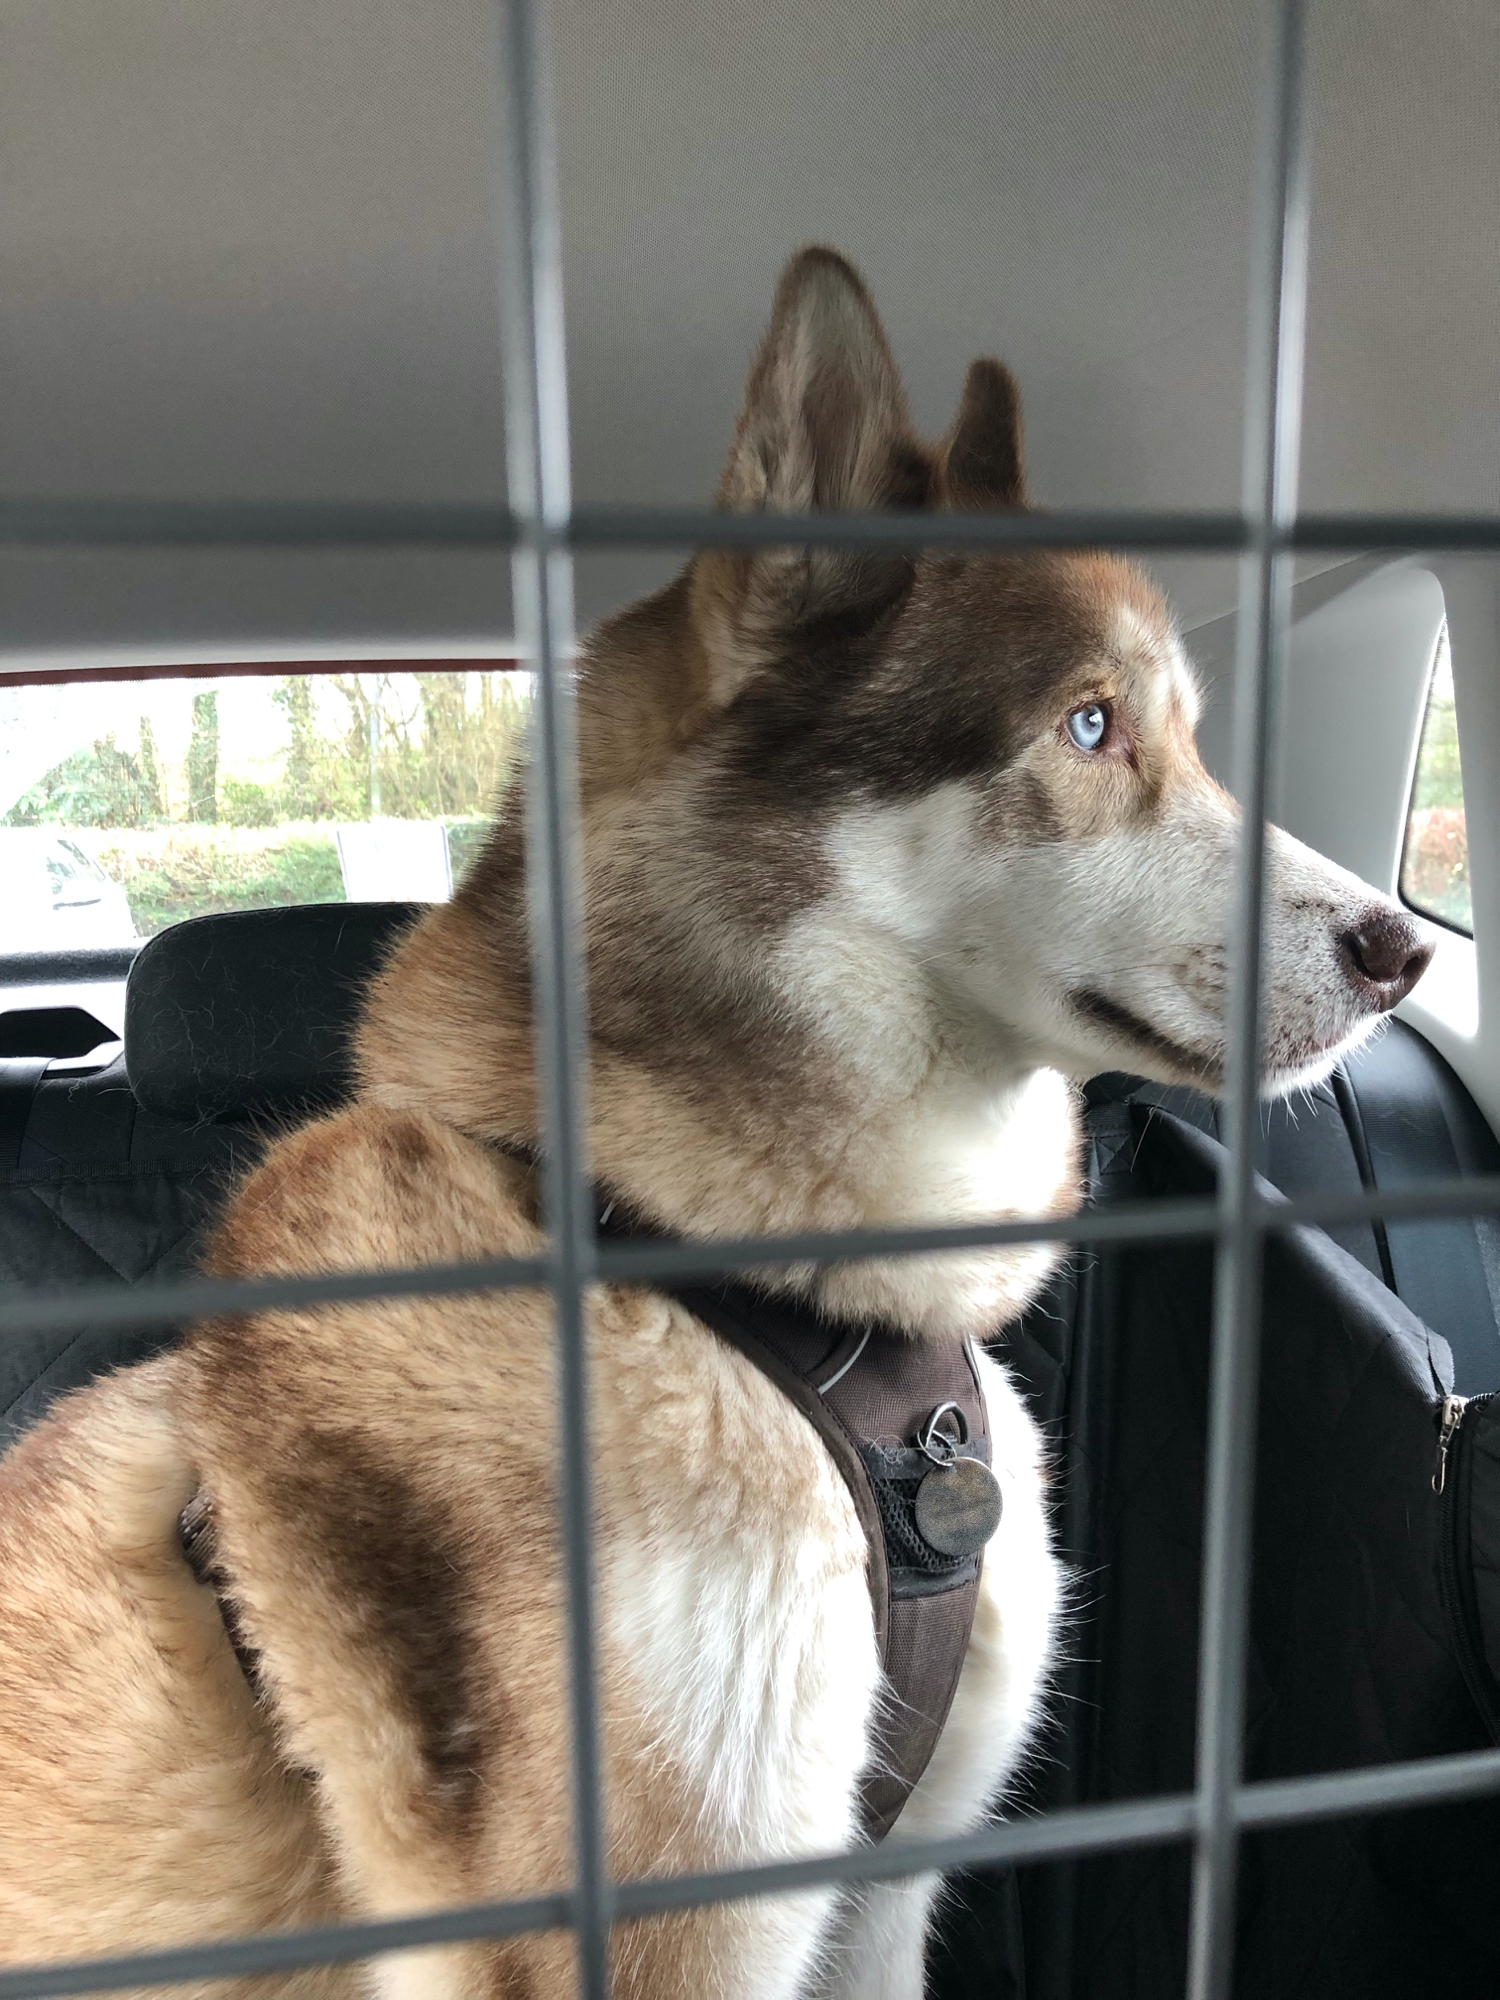 Oskar the huskamute sitting in the back of the car looking out of the window, viewed through the grid of a dog guard.